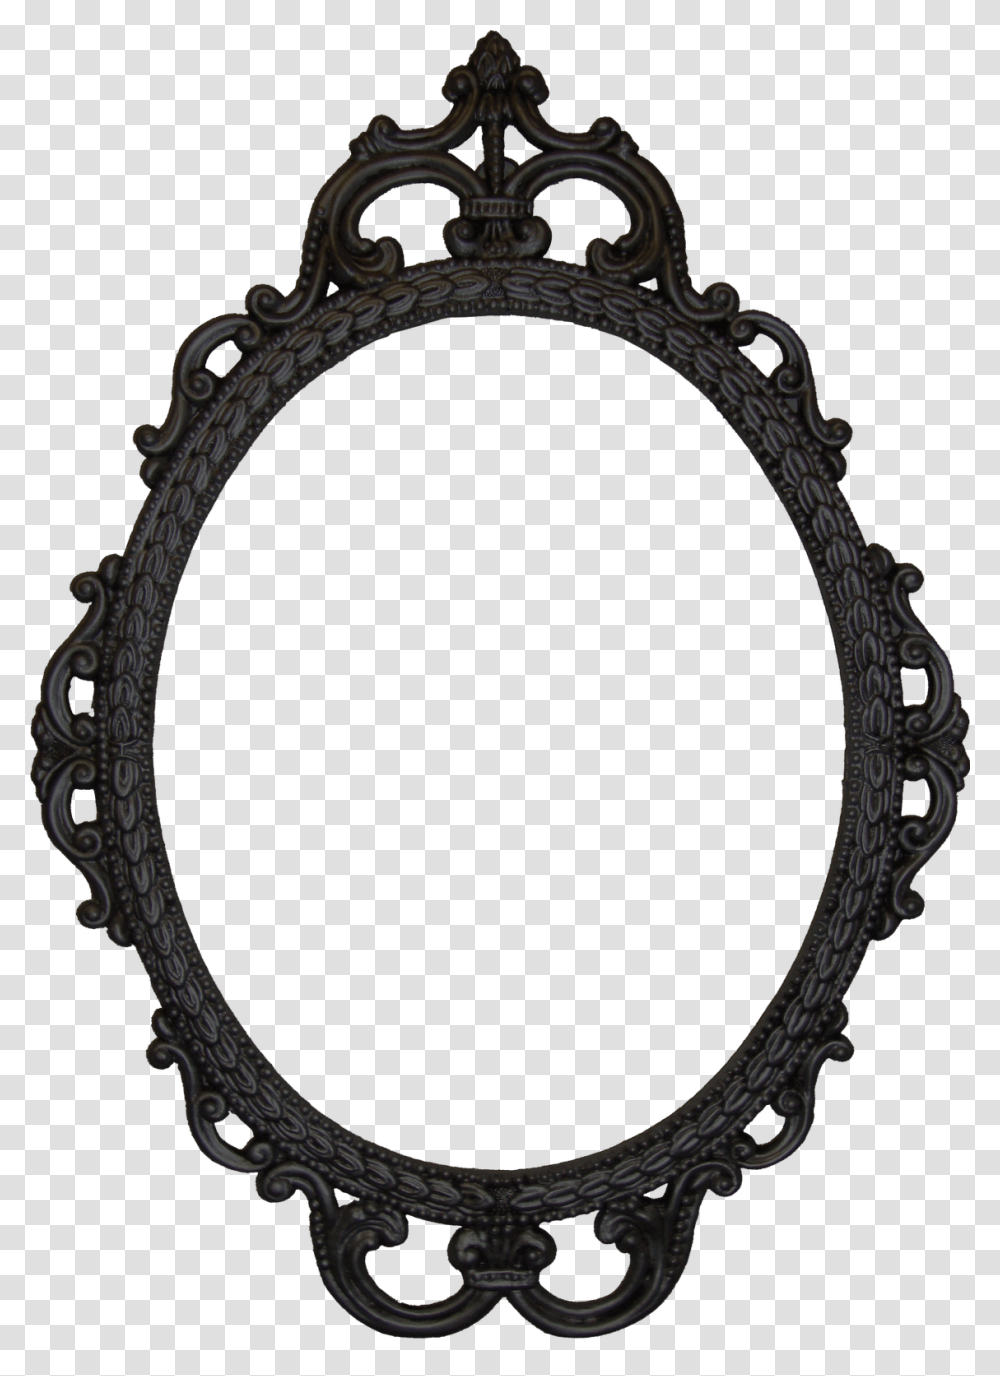 Free Digital Antique Photo Frames Projects To Try, Oval, Mirror Transparent Png